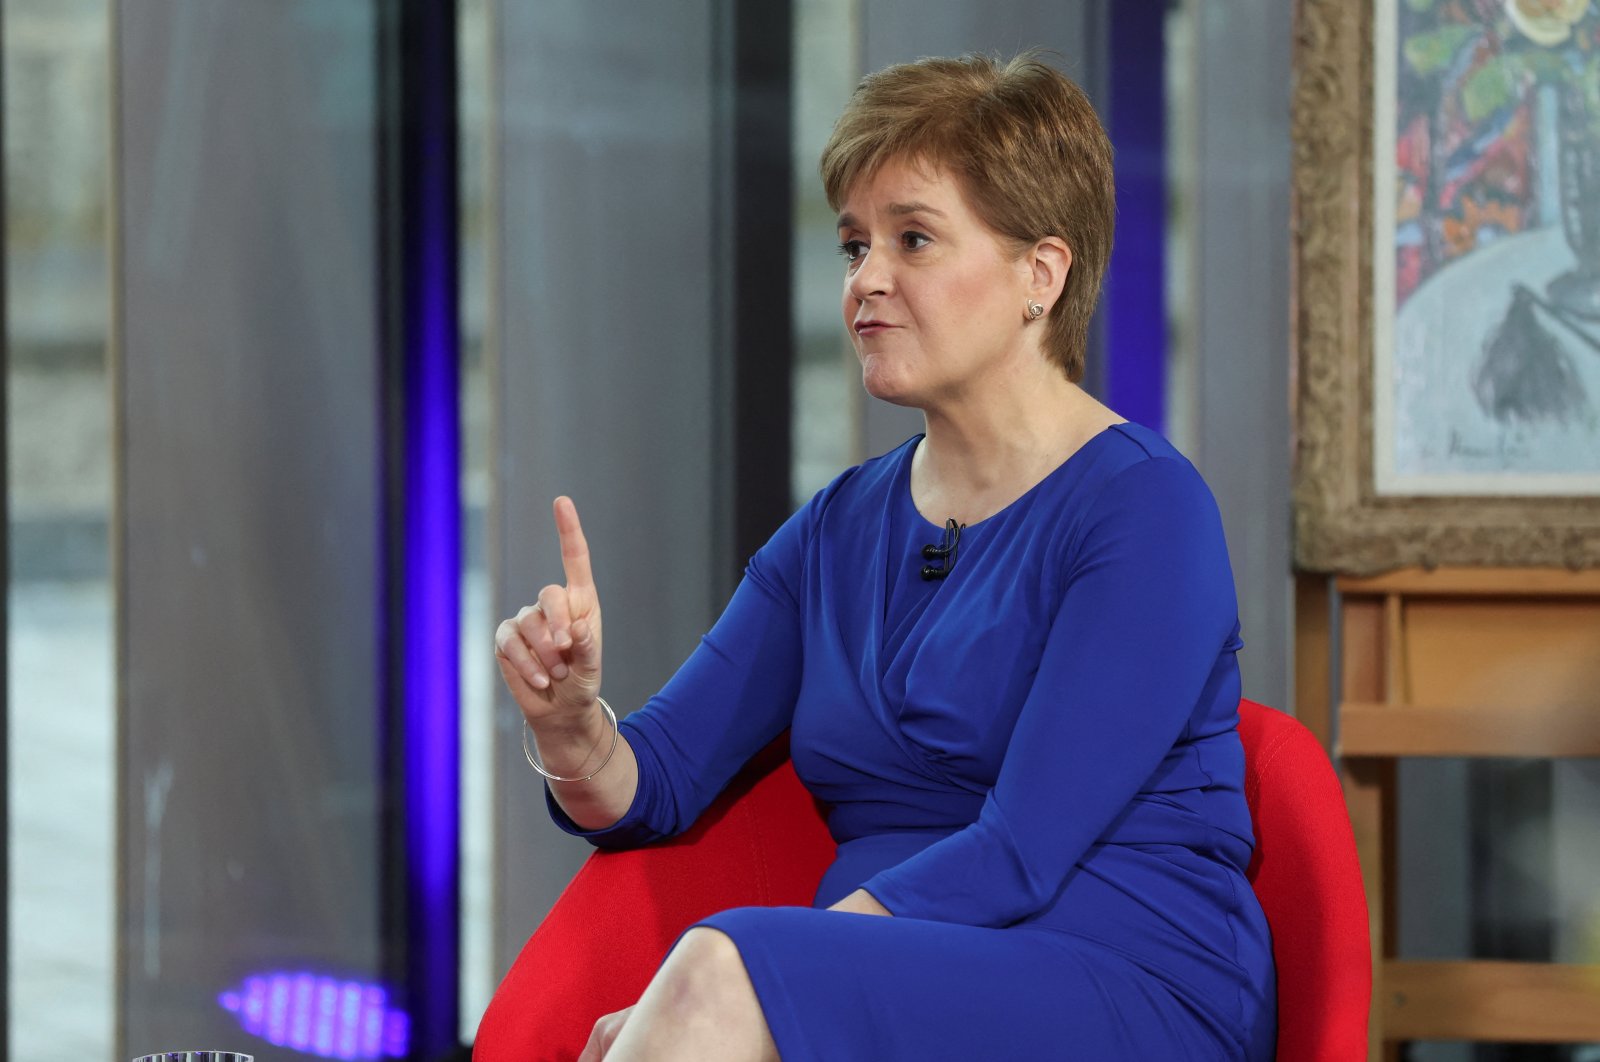 Scotland’s First Minister and Scottish National Party (SNP) Leader Nicola Sturgeon appears on the Sunday with Laura Kuenssberg show, at the Aberdeen Art Gallery, in Aberdeen, Scotland, Britain, Oct. 9, 2022. (Reuters Photo)